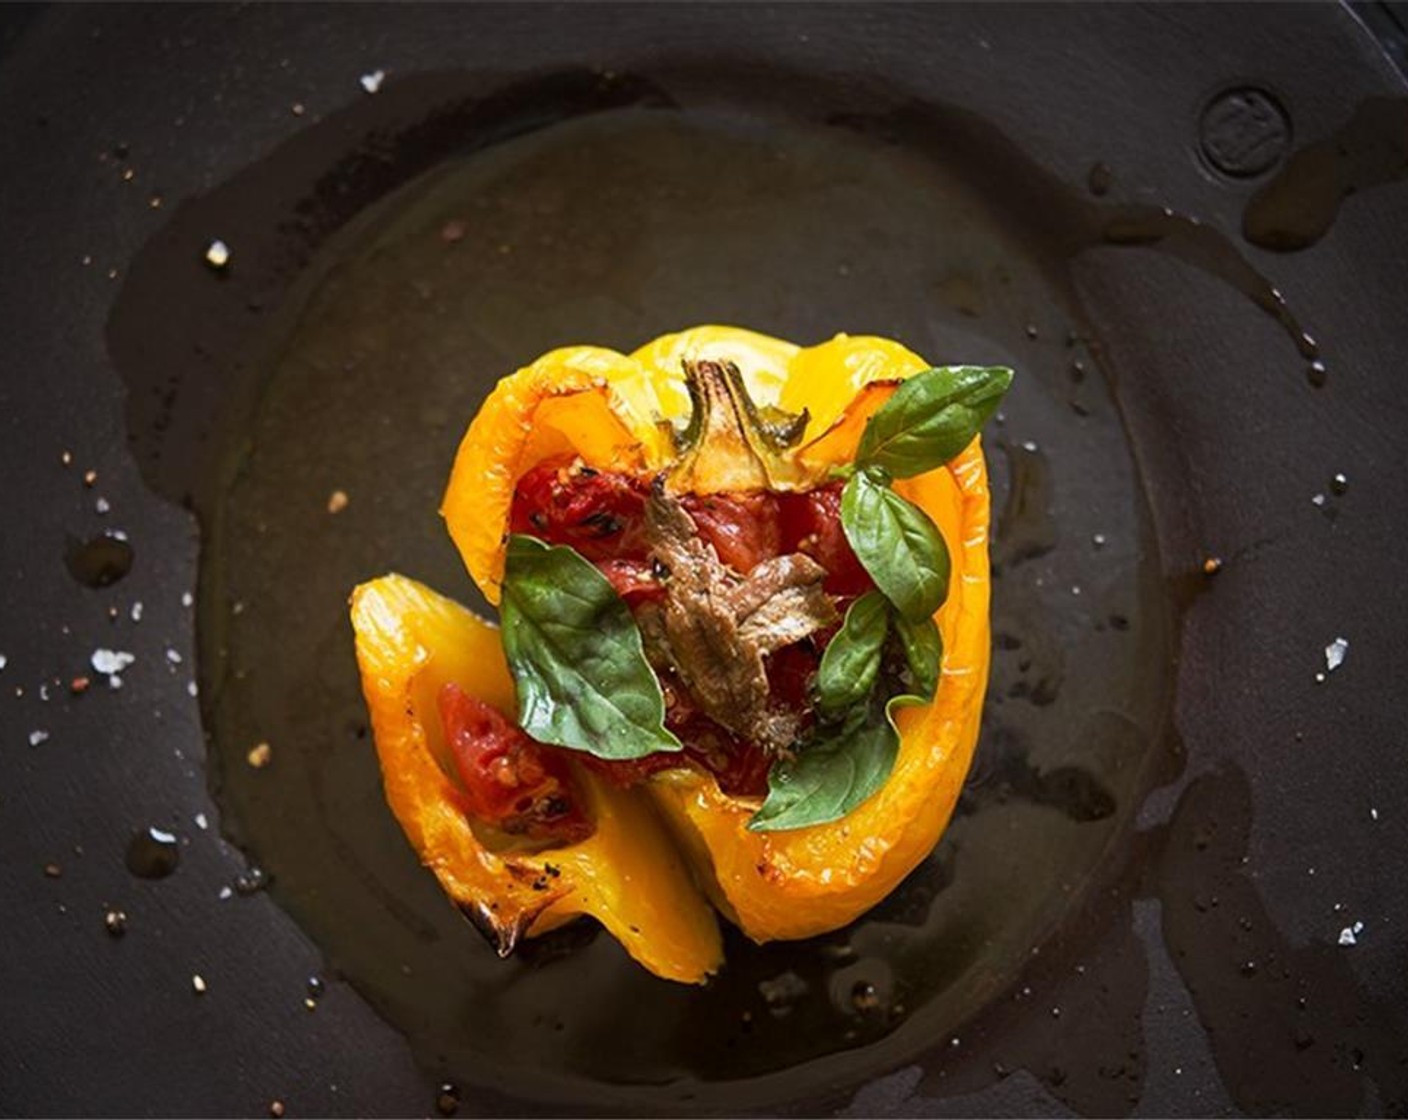 step 8 Transfer the cooked peppers to a serving dish and drizzle with all precious juices. Garnish with Fresh Basil (to taste). Enjoy!